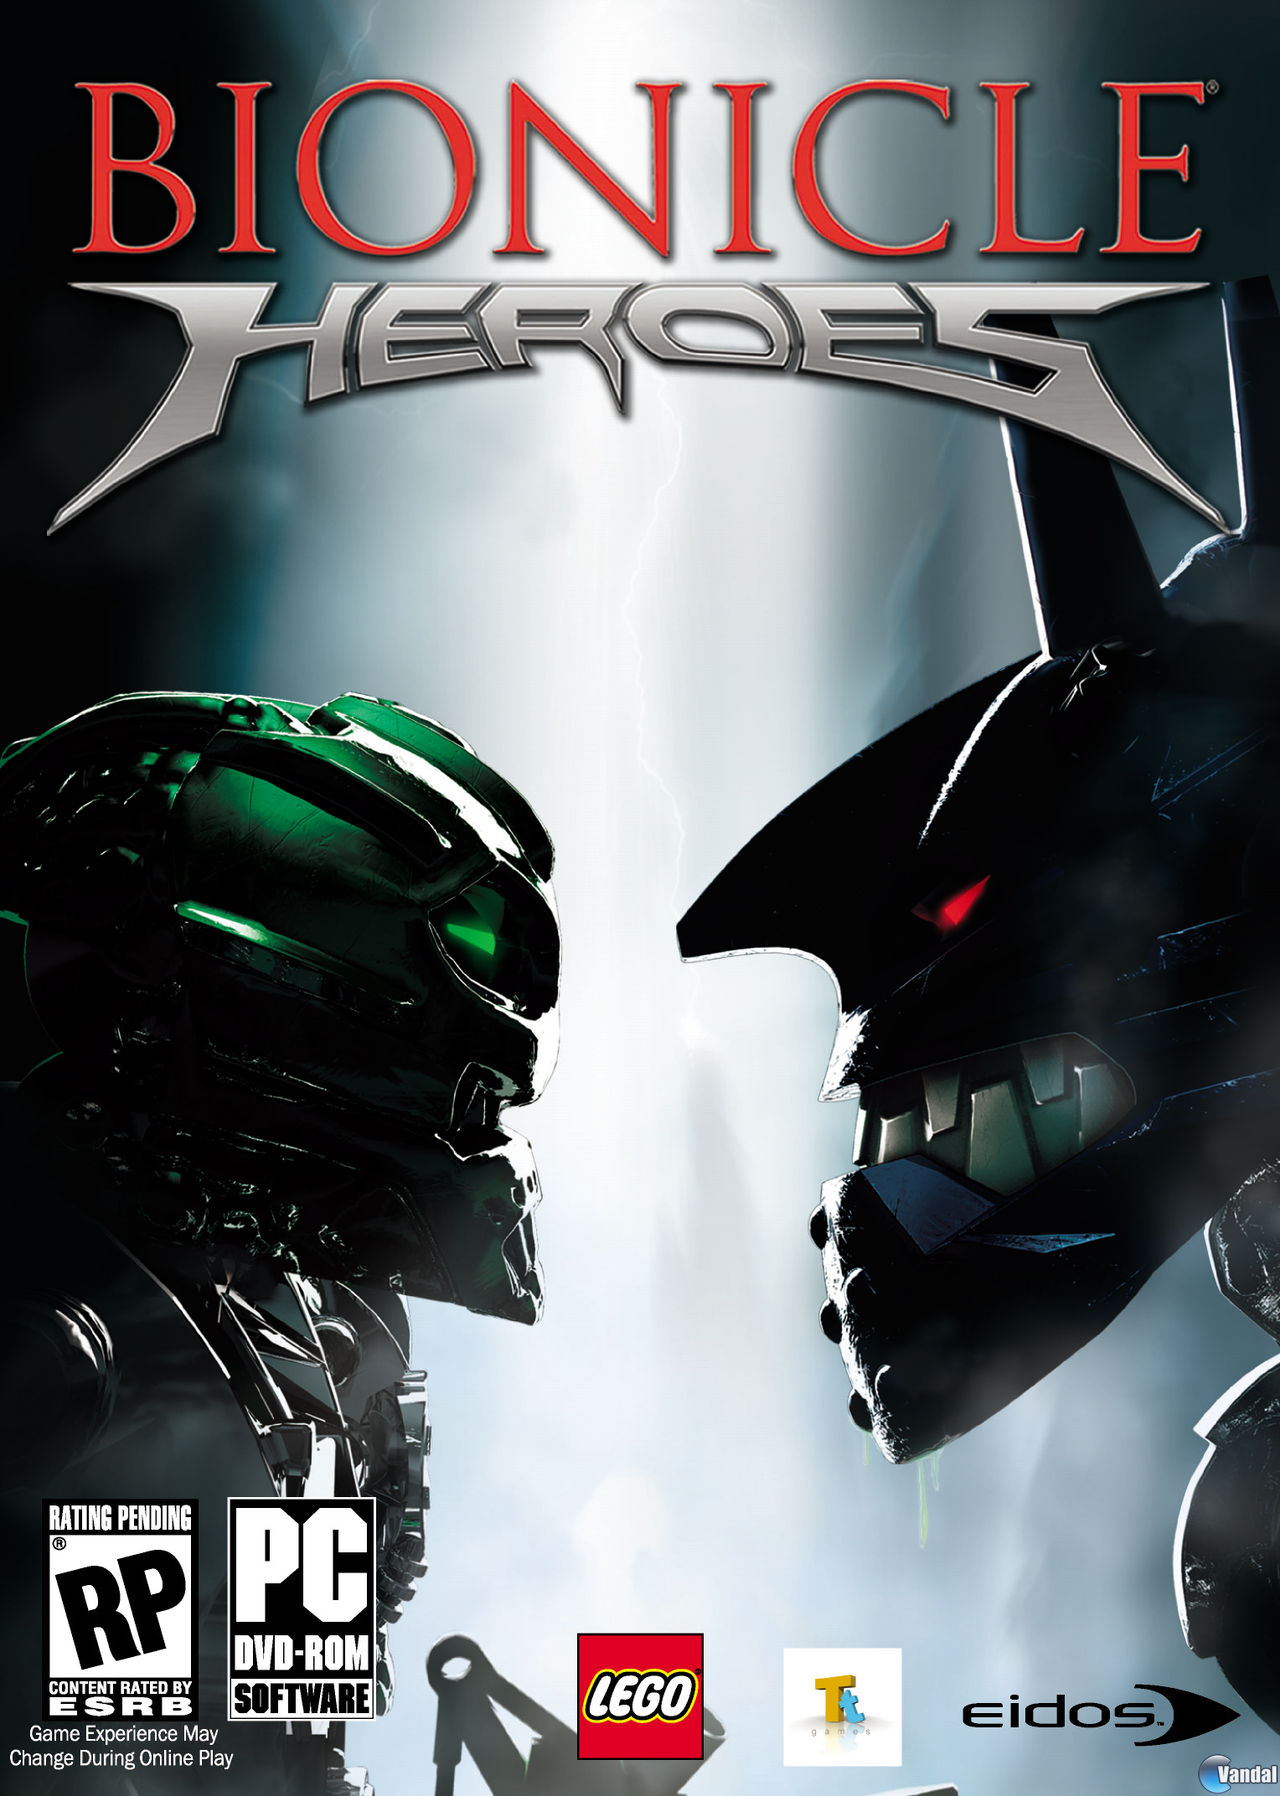 Bionicle Heroes Windows, X360, PS2, Wii, GCN, DS, GBA game - ModDB